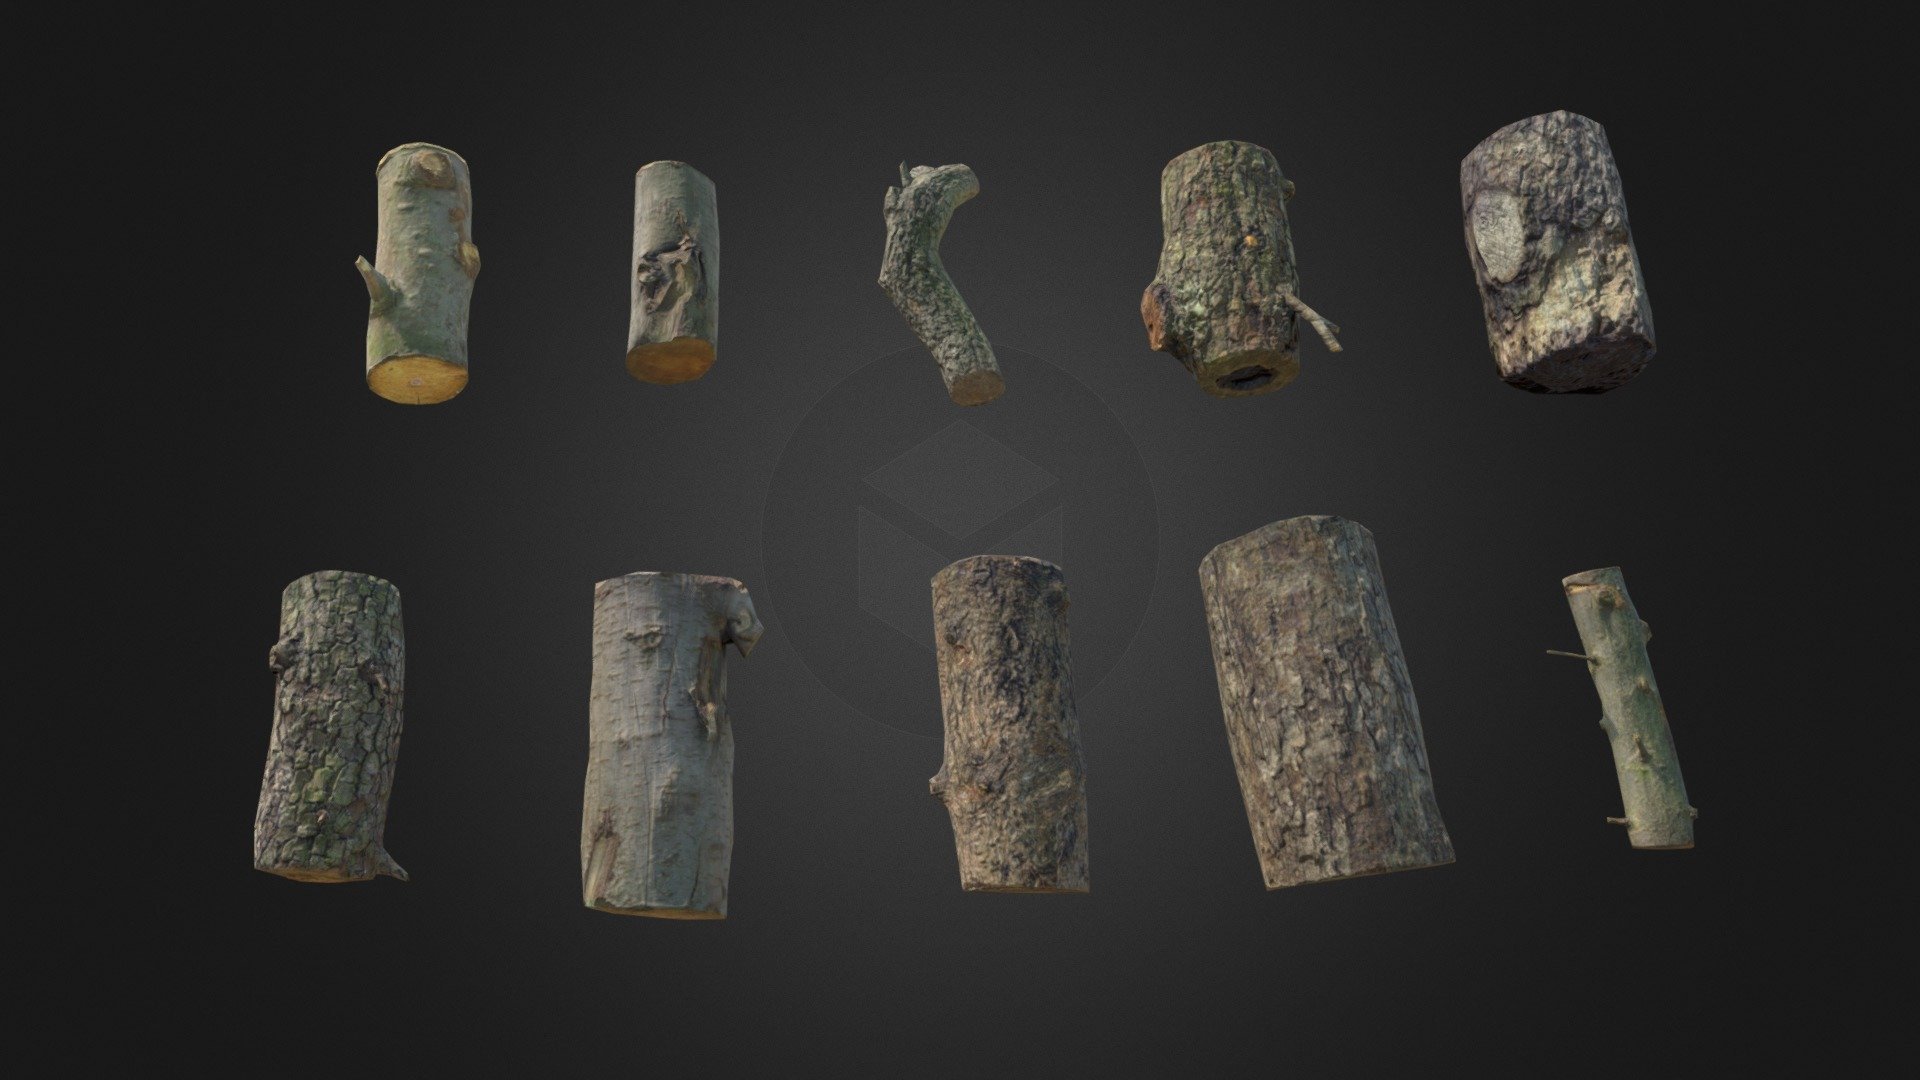 Photoscanned firewood logs. Based on photogrammetry data and enhanced with procedural tools.
Suitable for Desktop, VR, AR, mobile projects.
Assets are grouped to share the same 4k Albedo, Normal, and Roughness(Smoothness) textures/
Each scan has been manually retopologized and has ~250-600 tris with LOD stages down to ~64 tris.
Assets are scaled 1:1 as in real life 3d model